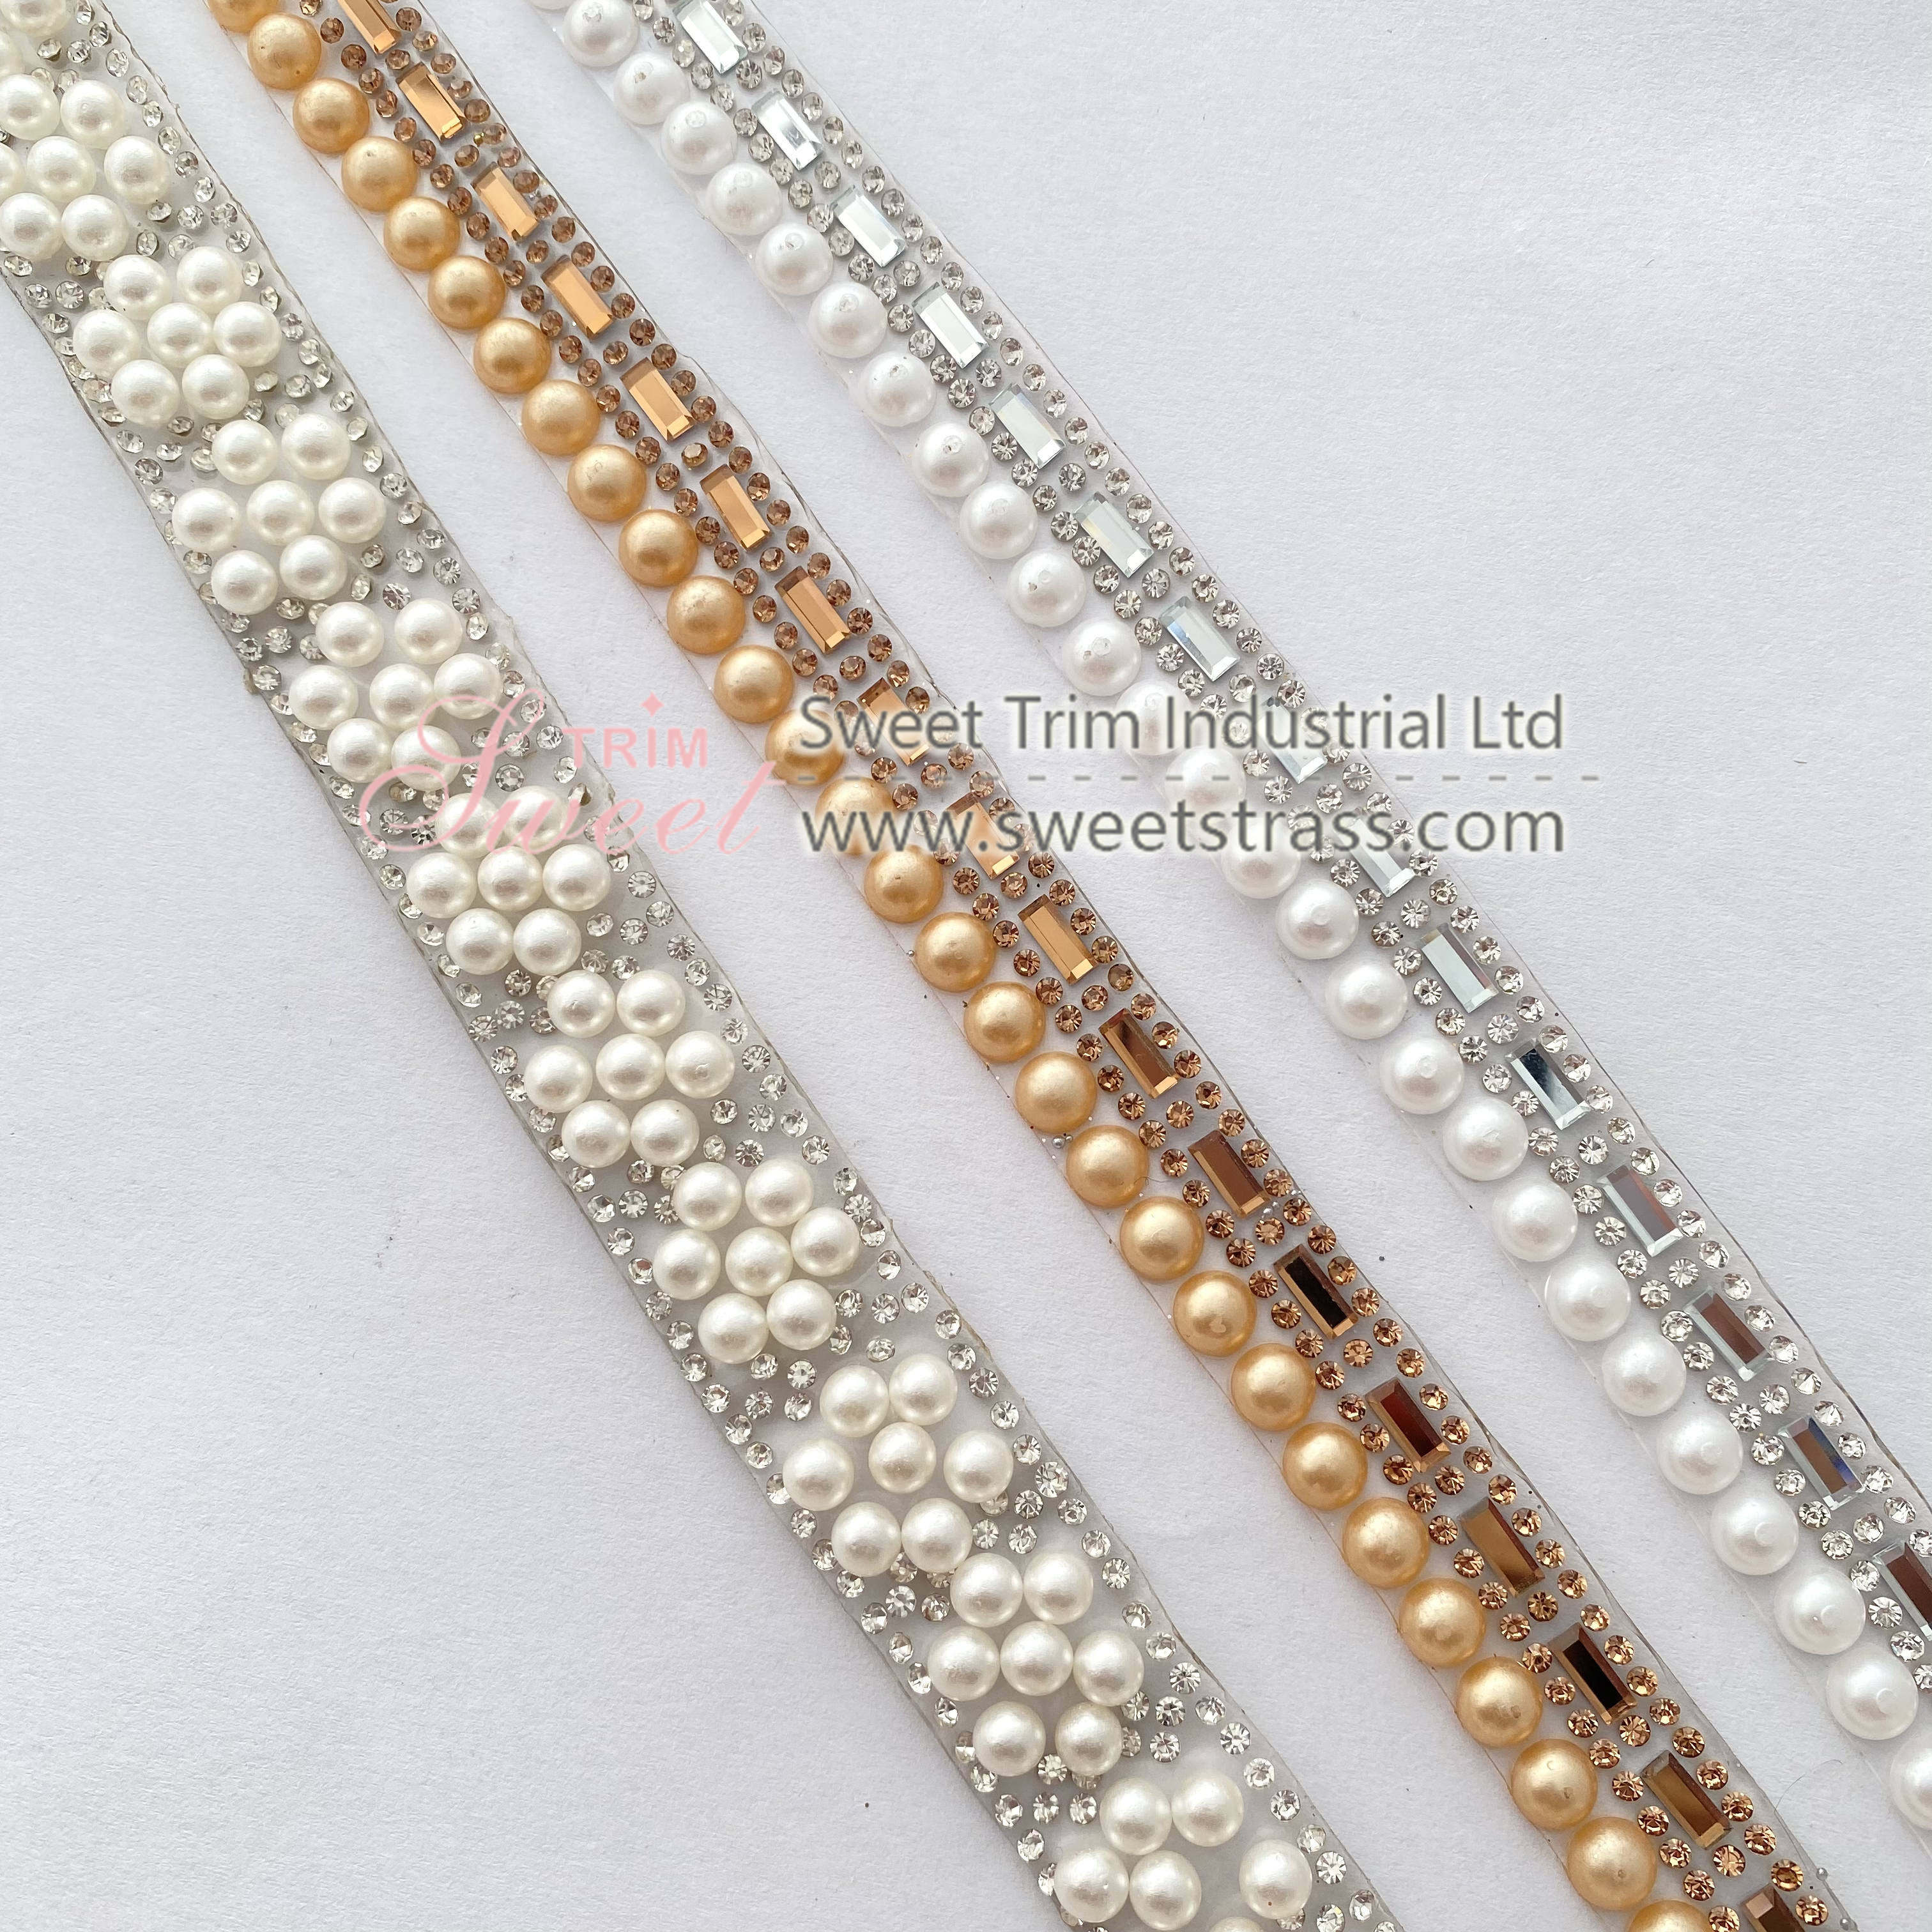 Clear Crystal Adhesive Tape Strass Hot Fix Trimming Band For Dress Deals In Wholesale